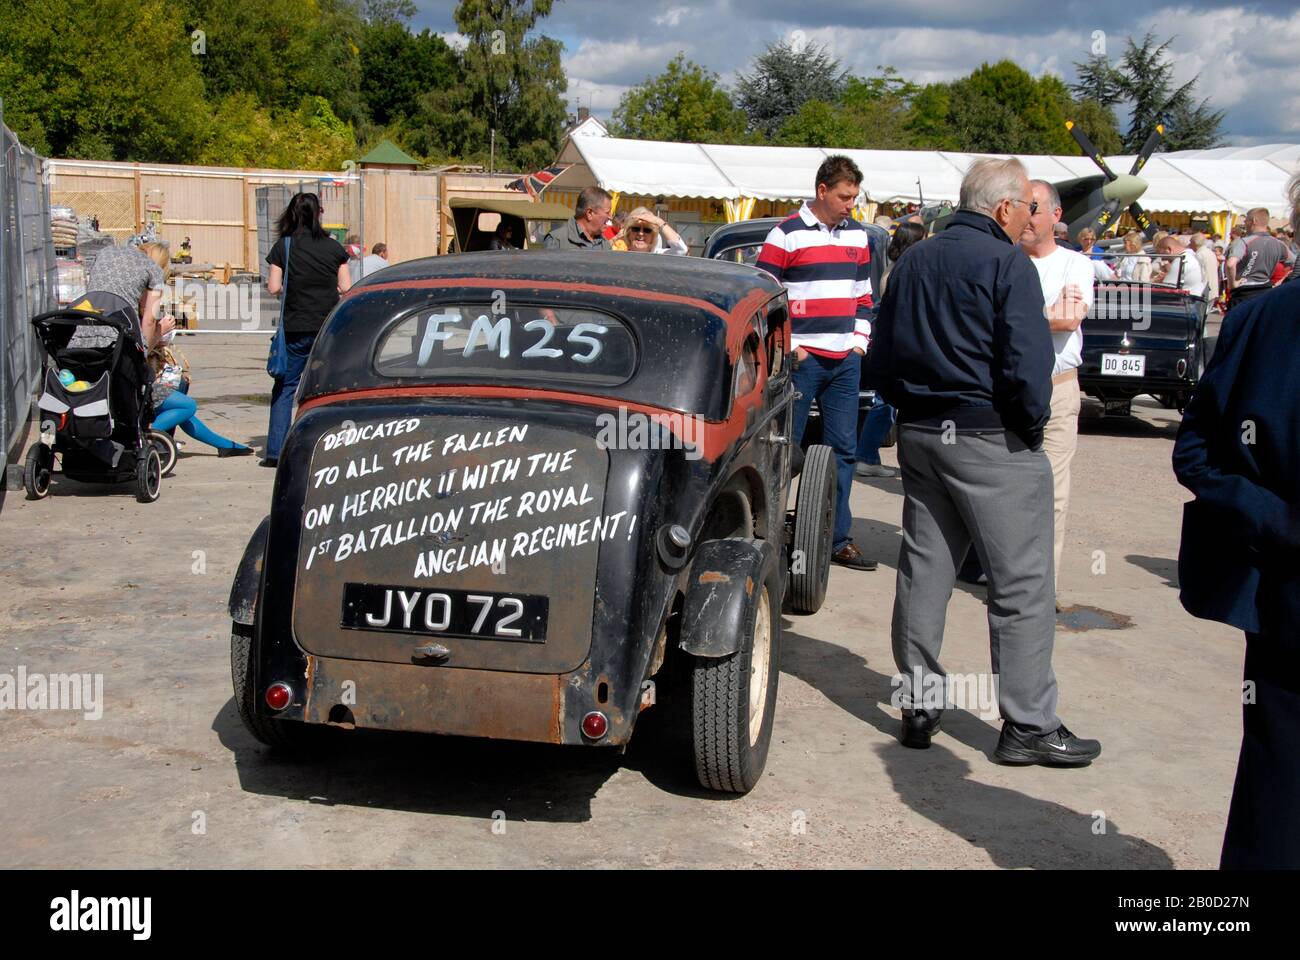 Rear view of modified 1948 Morris 8 car, with dedication on the back, on display at small local motor show Stock Photo